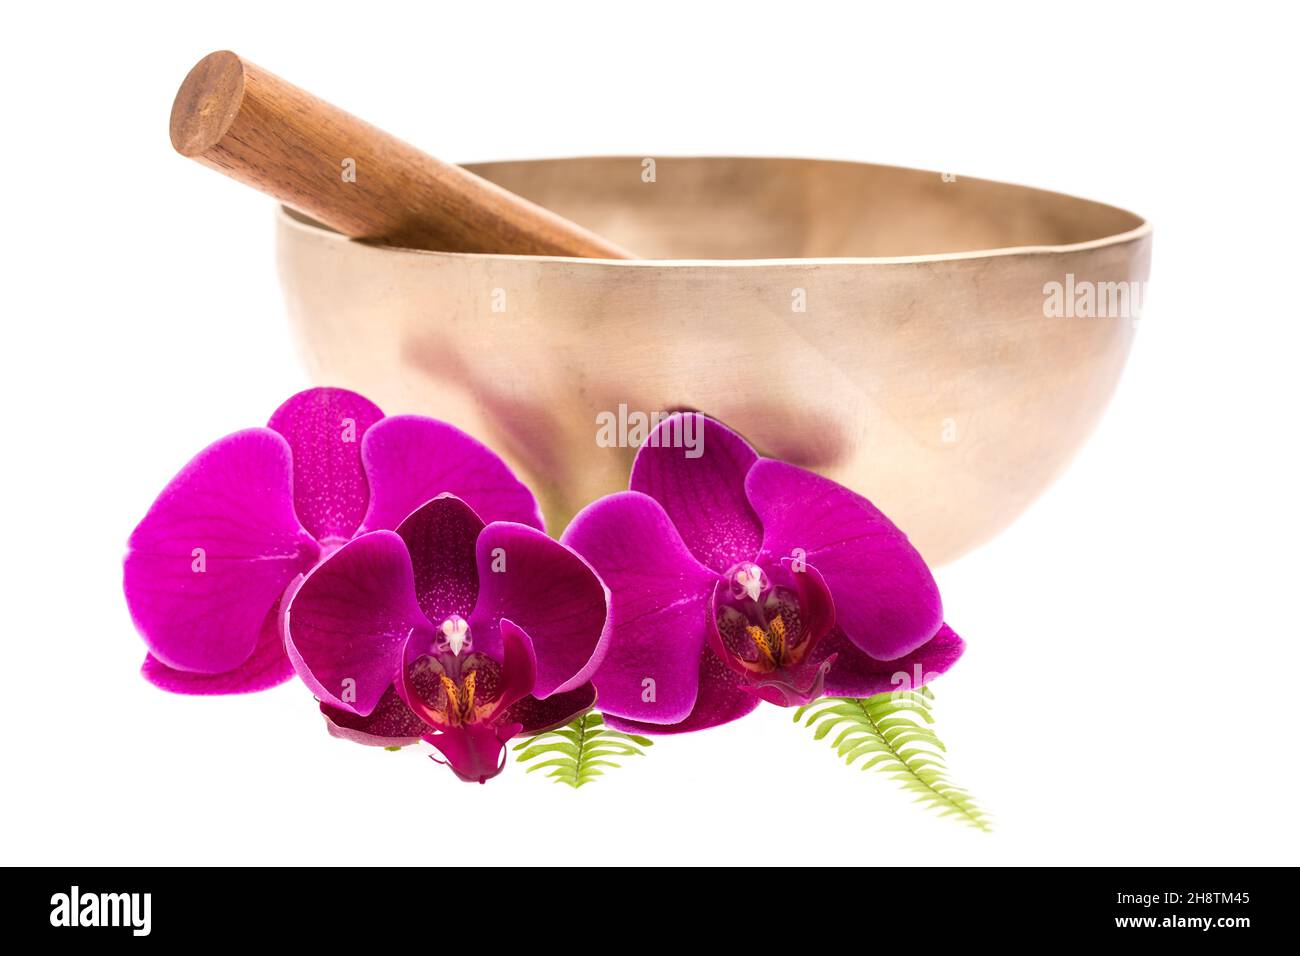 Singing bowl with flowers isolated on white background Stock Photo